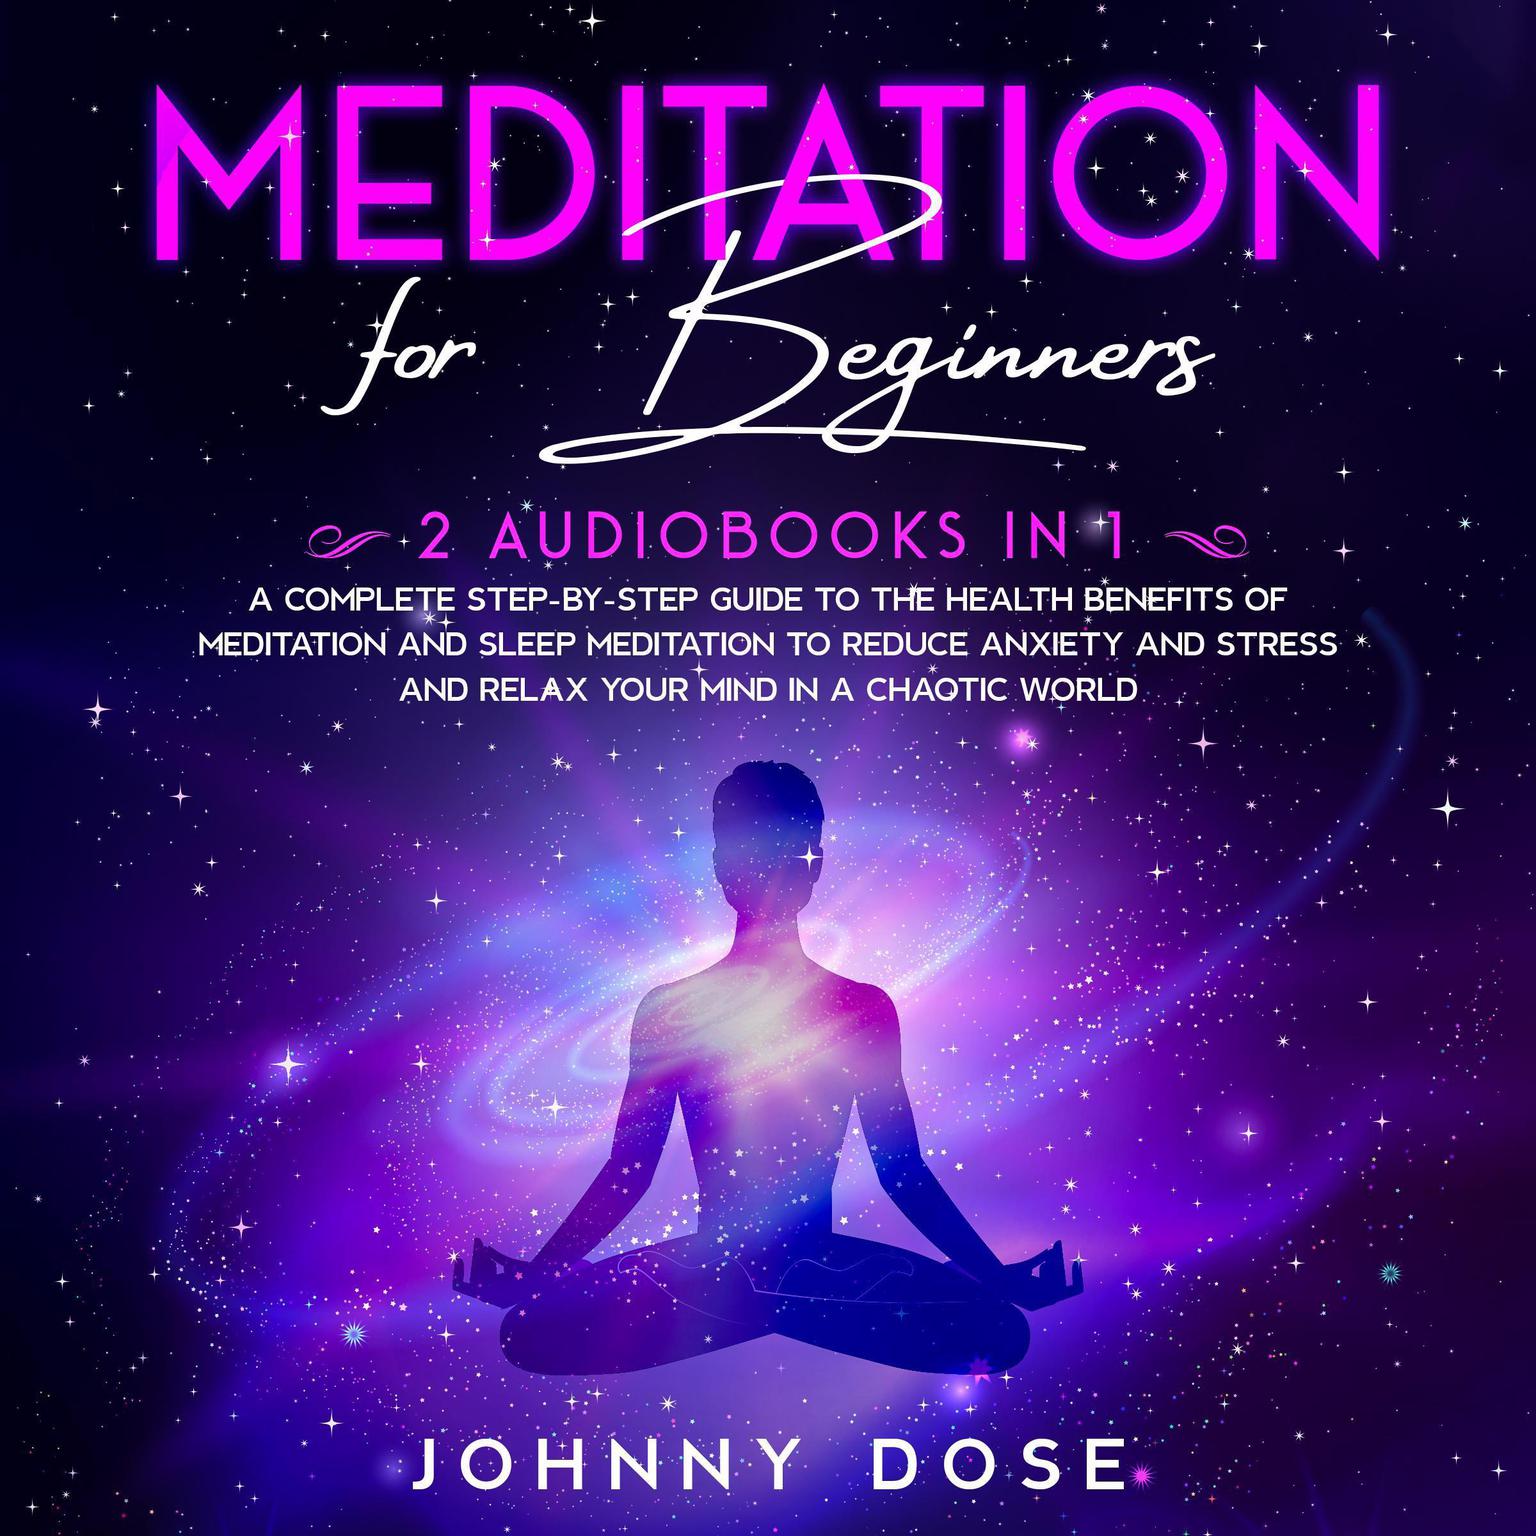 Meditation for Beginners: : 2 Audiobooks in 1 - A Complete Step-by-Step Guide to the Health Benefits of Meditation and Sleep Meditation to Reduce Anxiety and Stress and Relax Your Mind in a Chaotic World Audiobook, by Johnny Dose